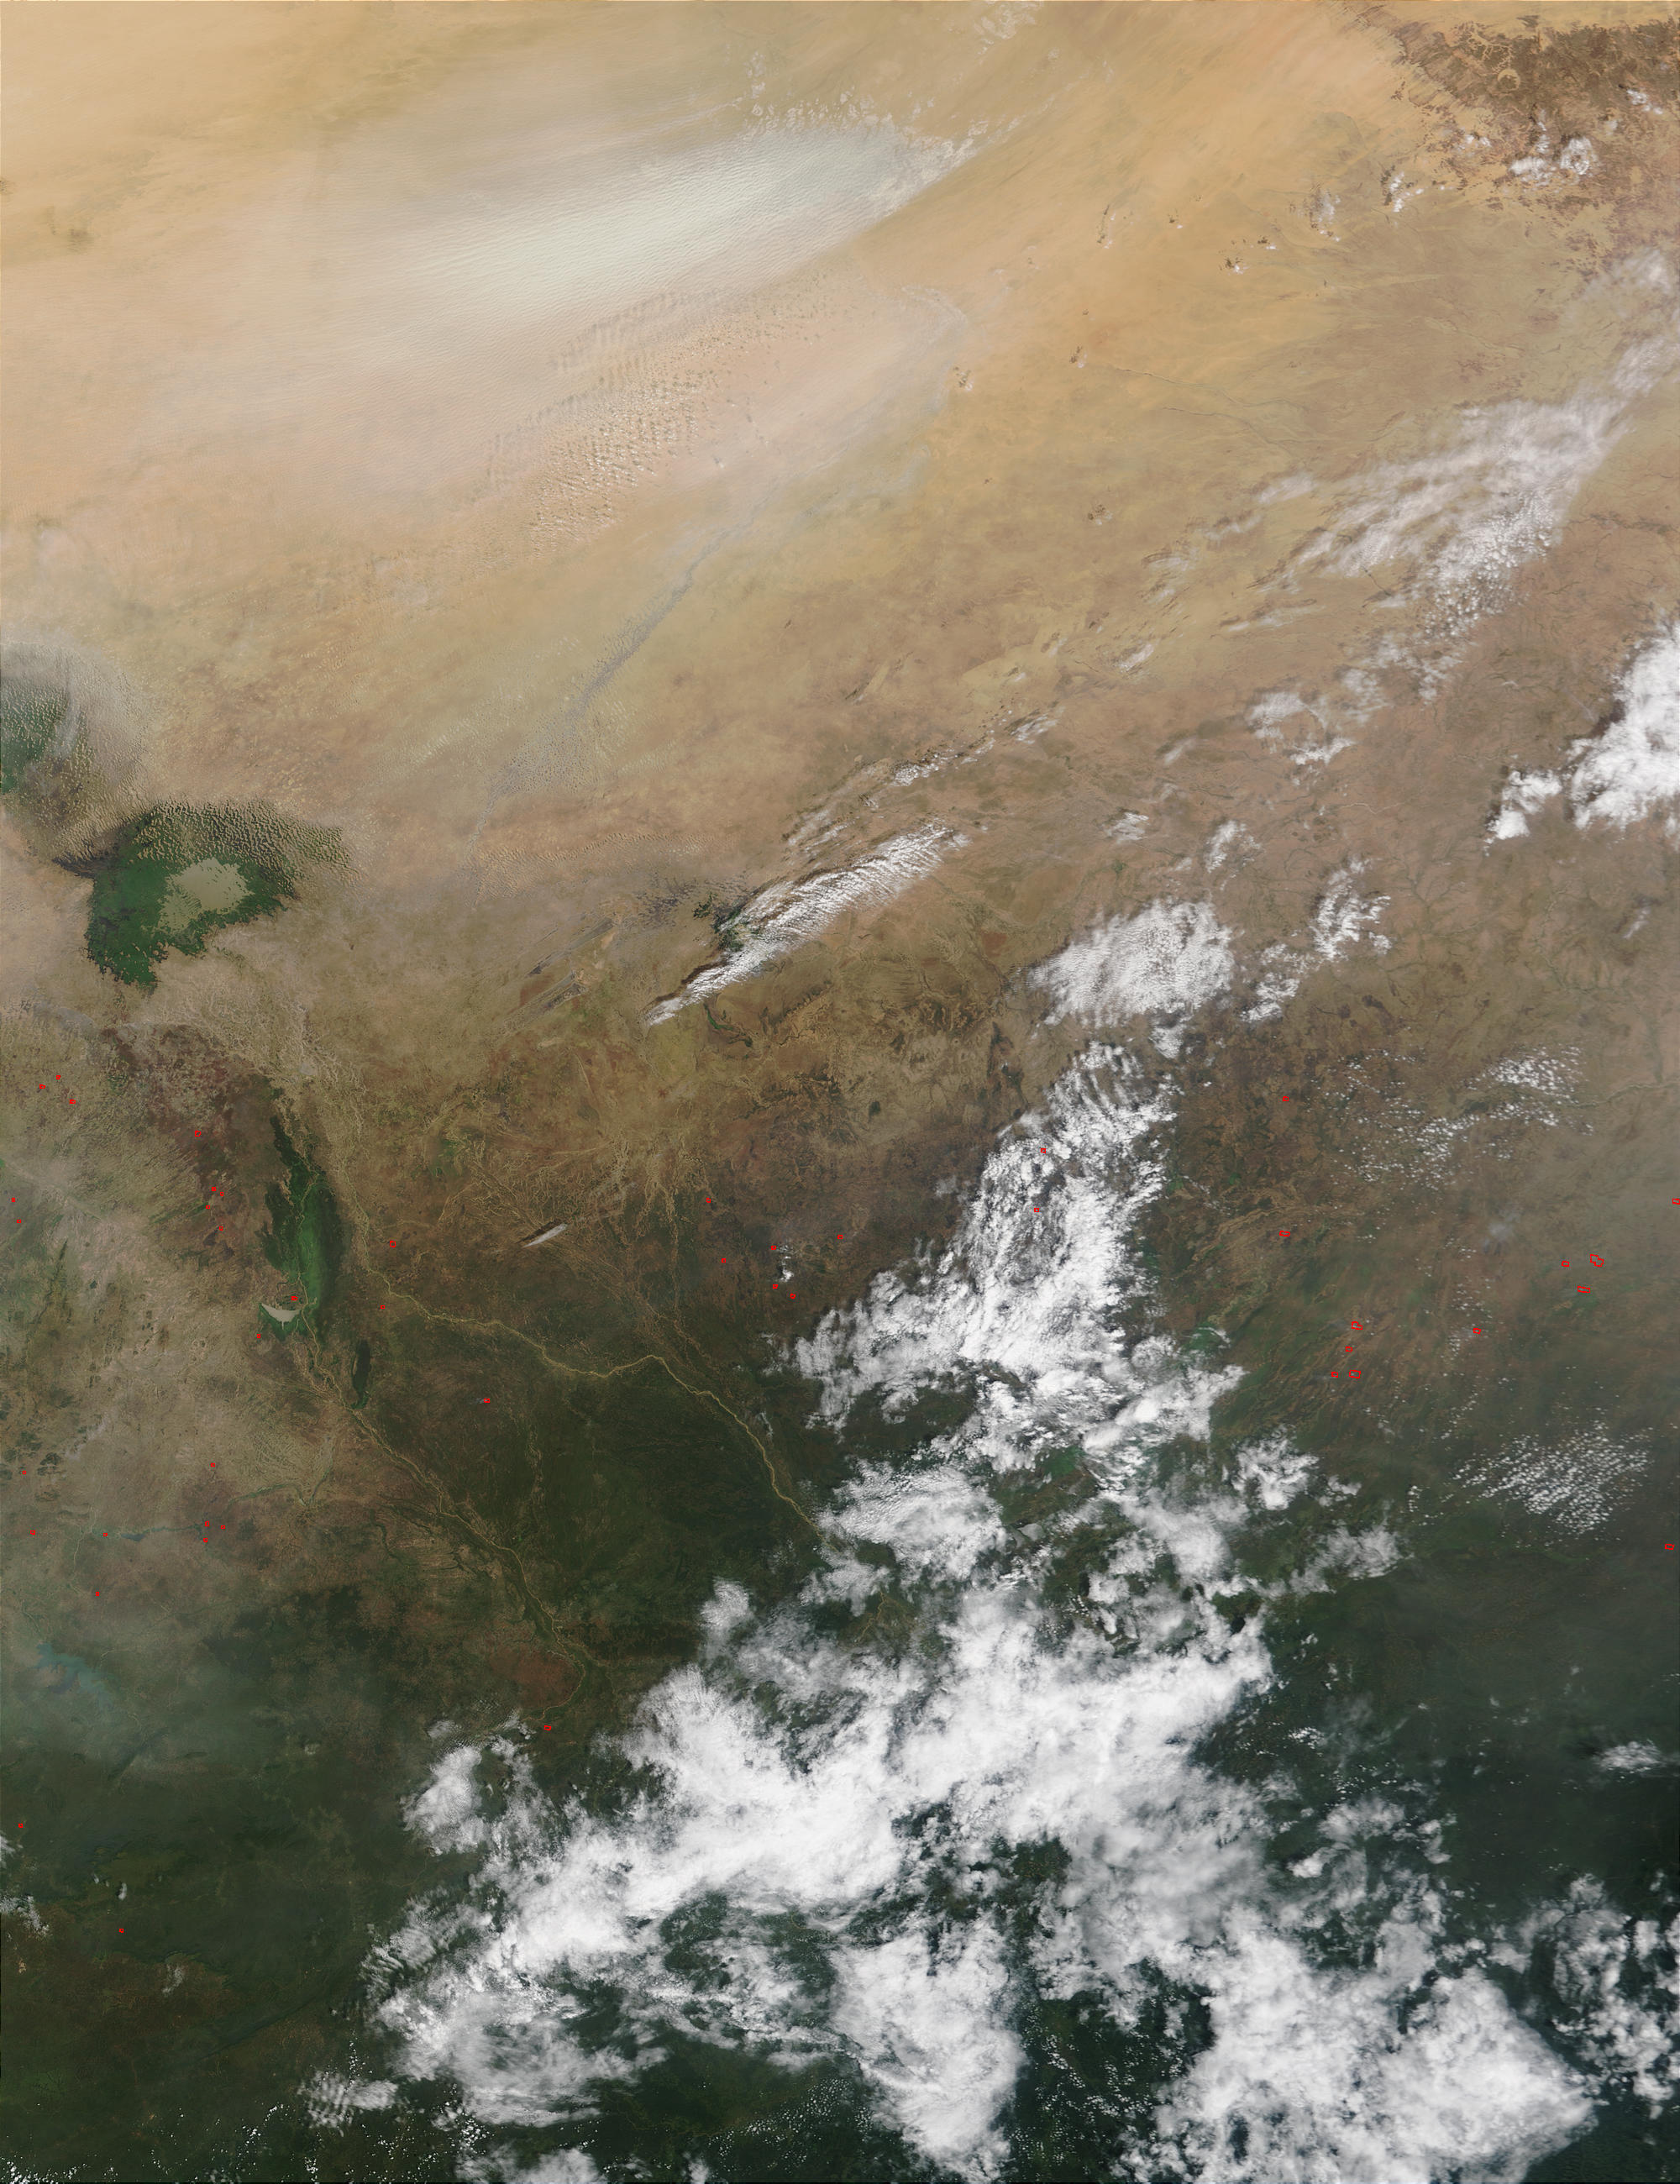 Dust storm and fires in Chad - related image preview